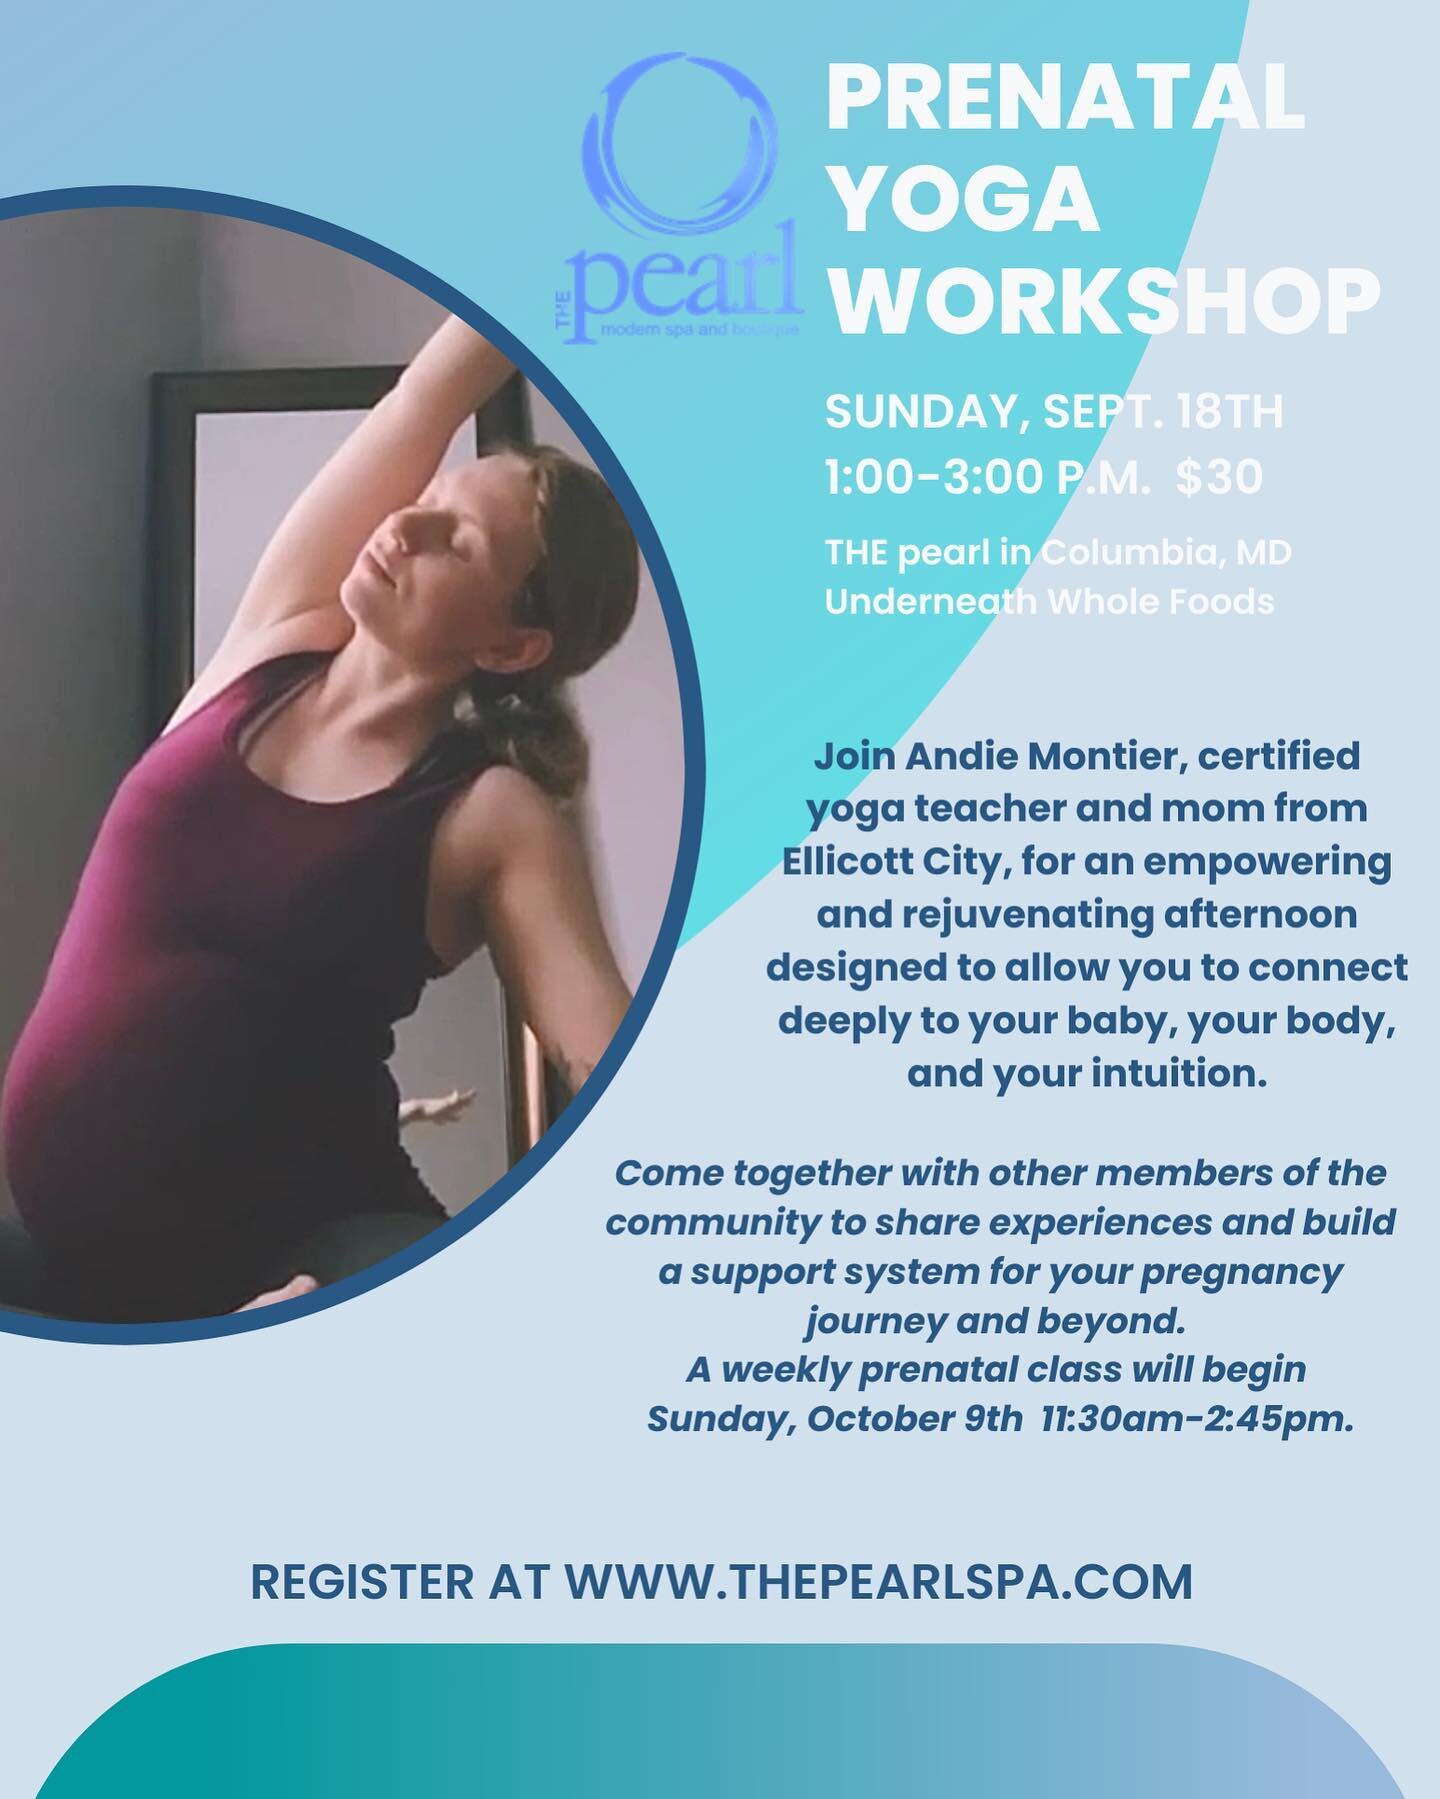 Prenatal yoga workshop coming to @thepearlspa Sunday, September 18th from 1-3pm! Please feel free to share this post and pass along to anyone you know who is expecting. 😊 Workshop description below! 

Join Andie Montier, a 500+ hour certified yoga t